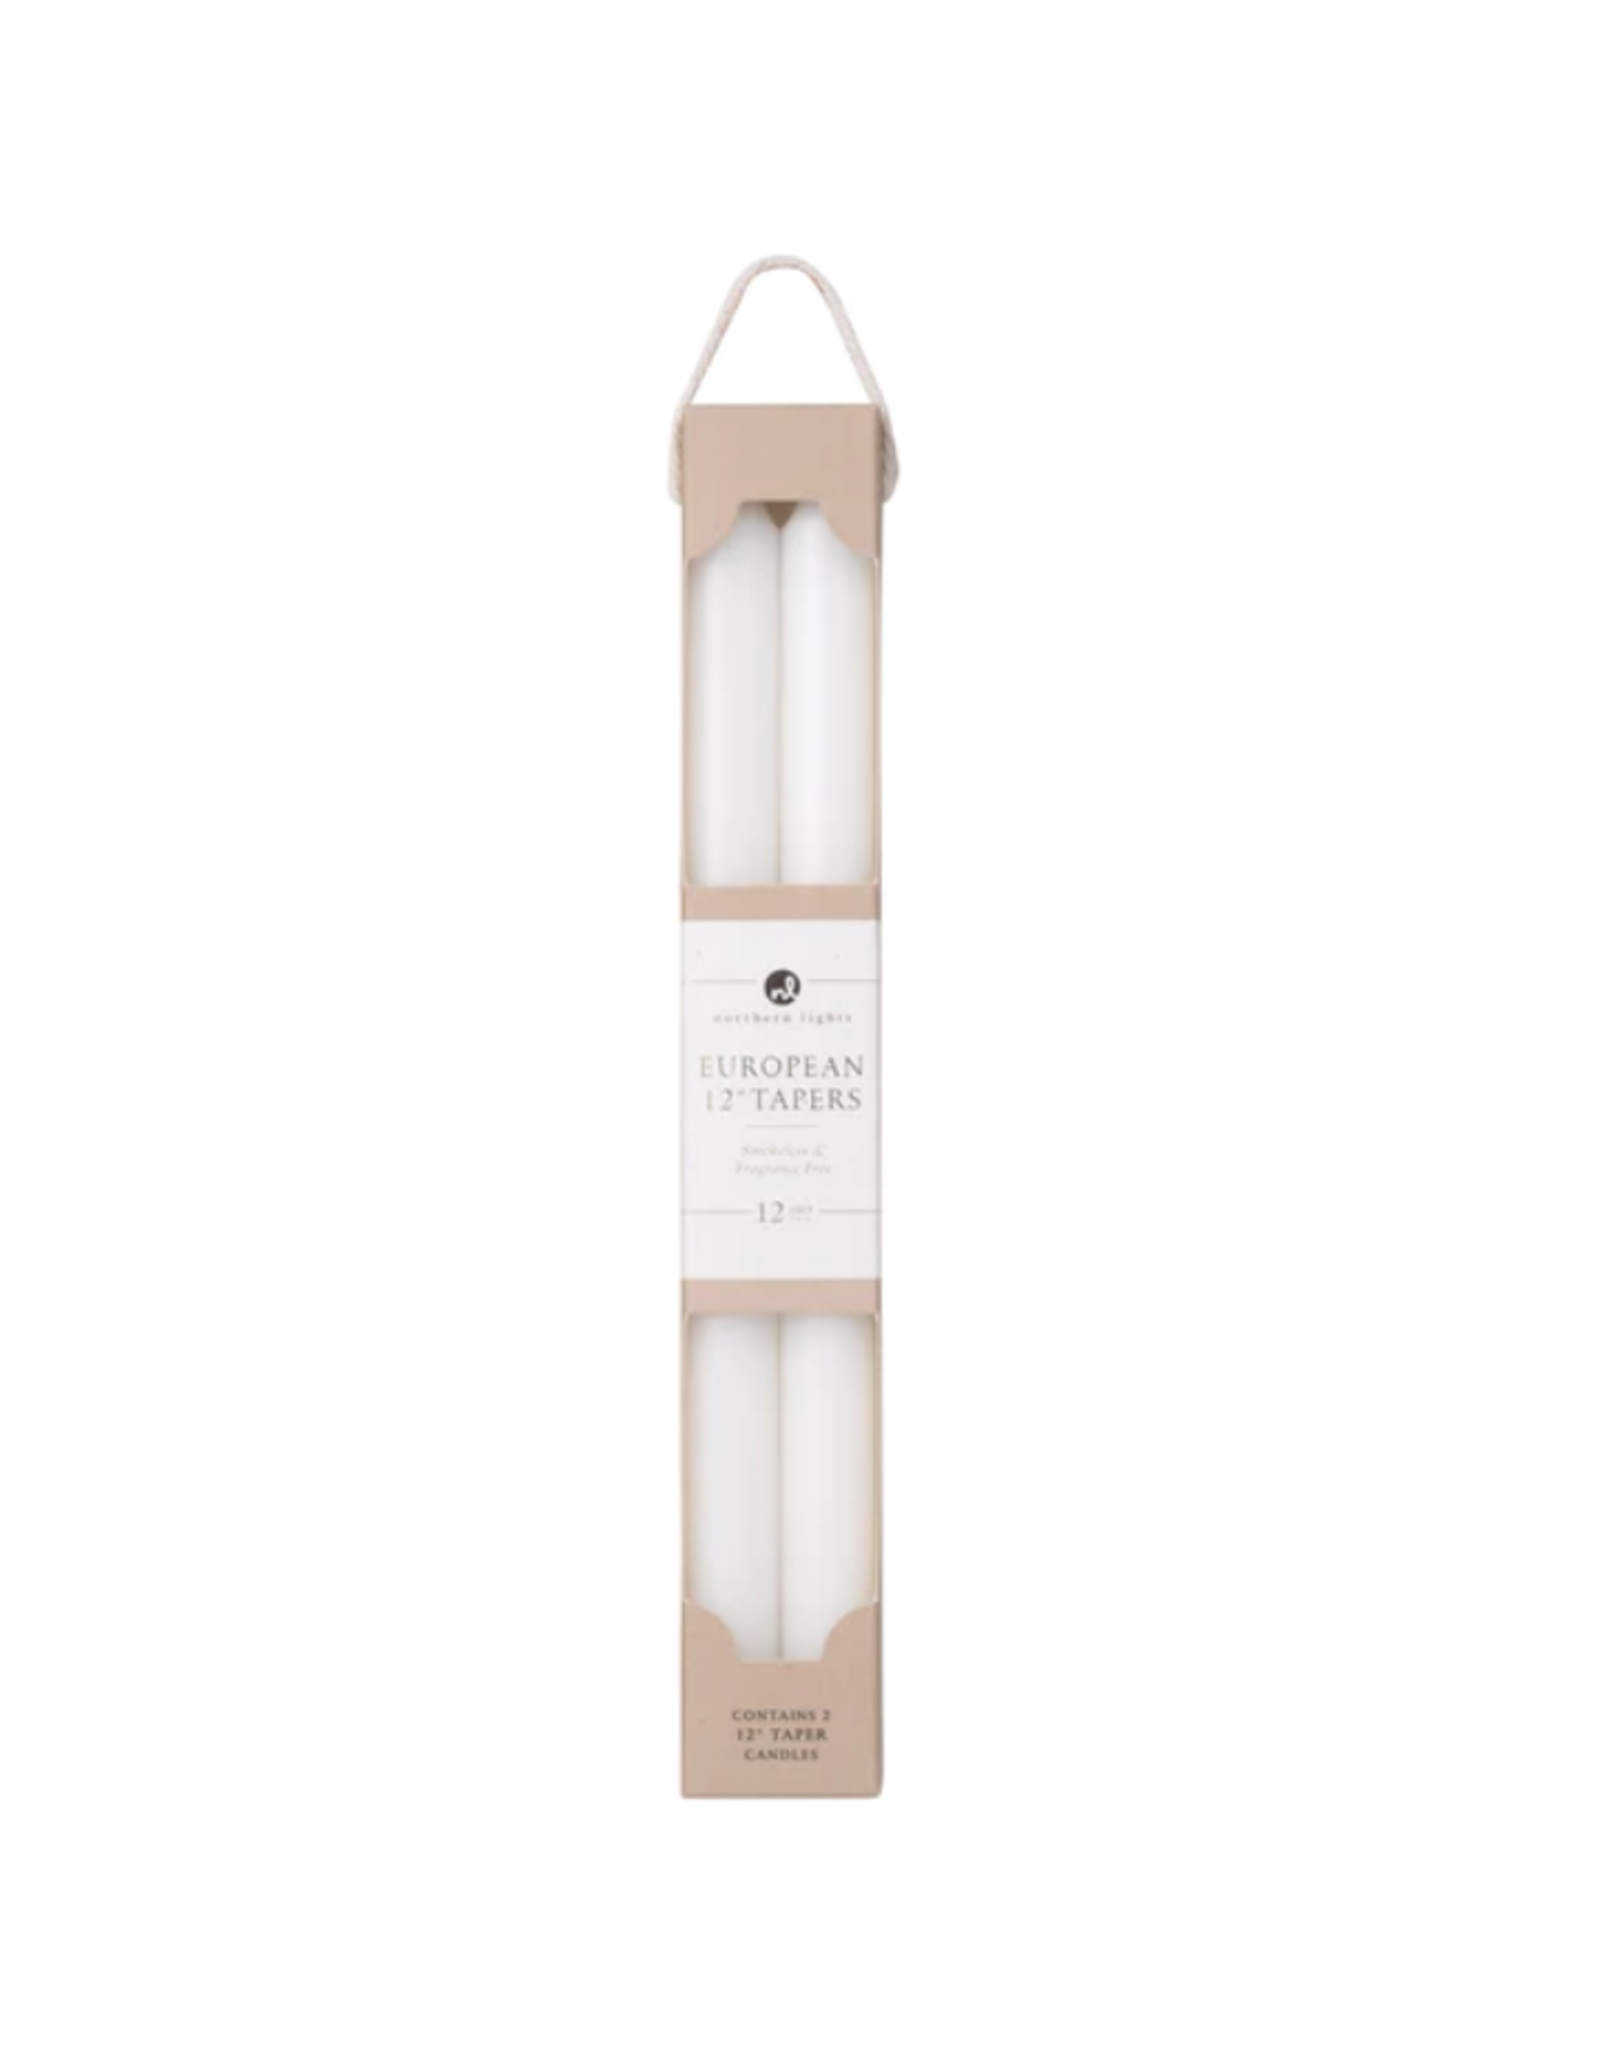 Northern Lights Taper Candle 2 Pack in Pure White